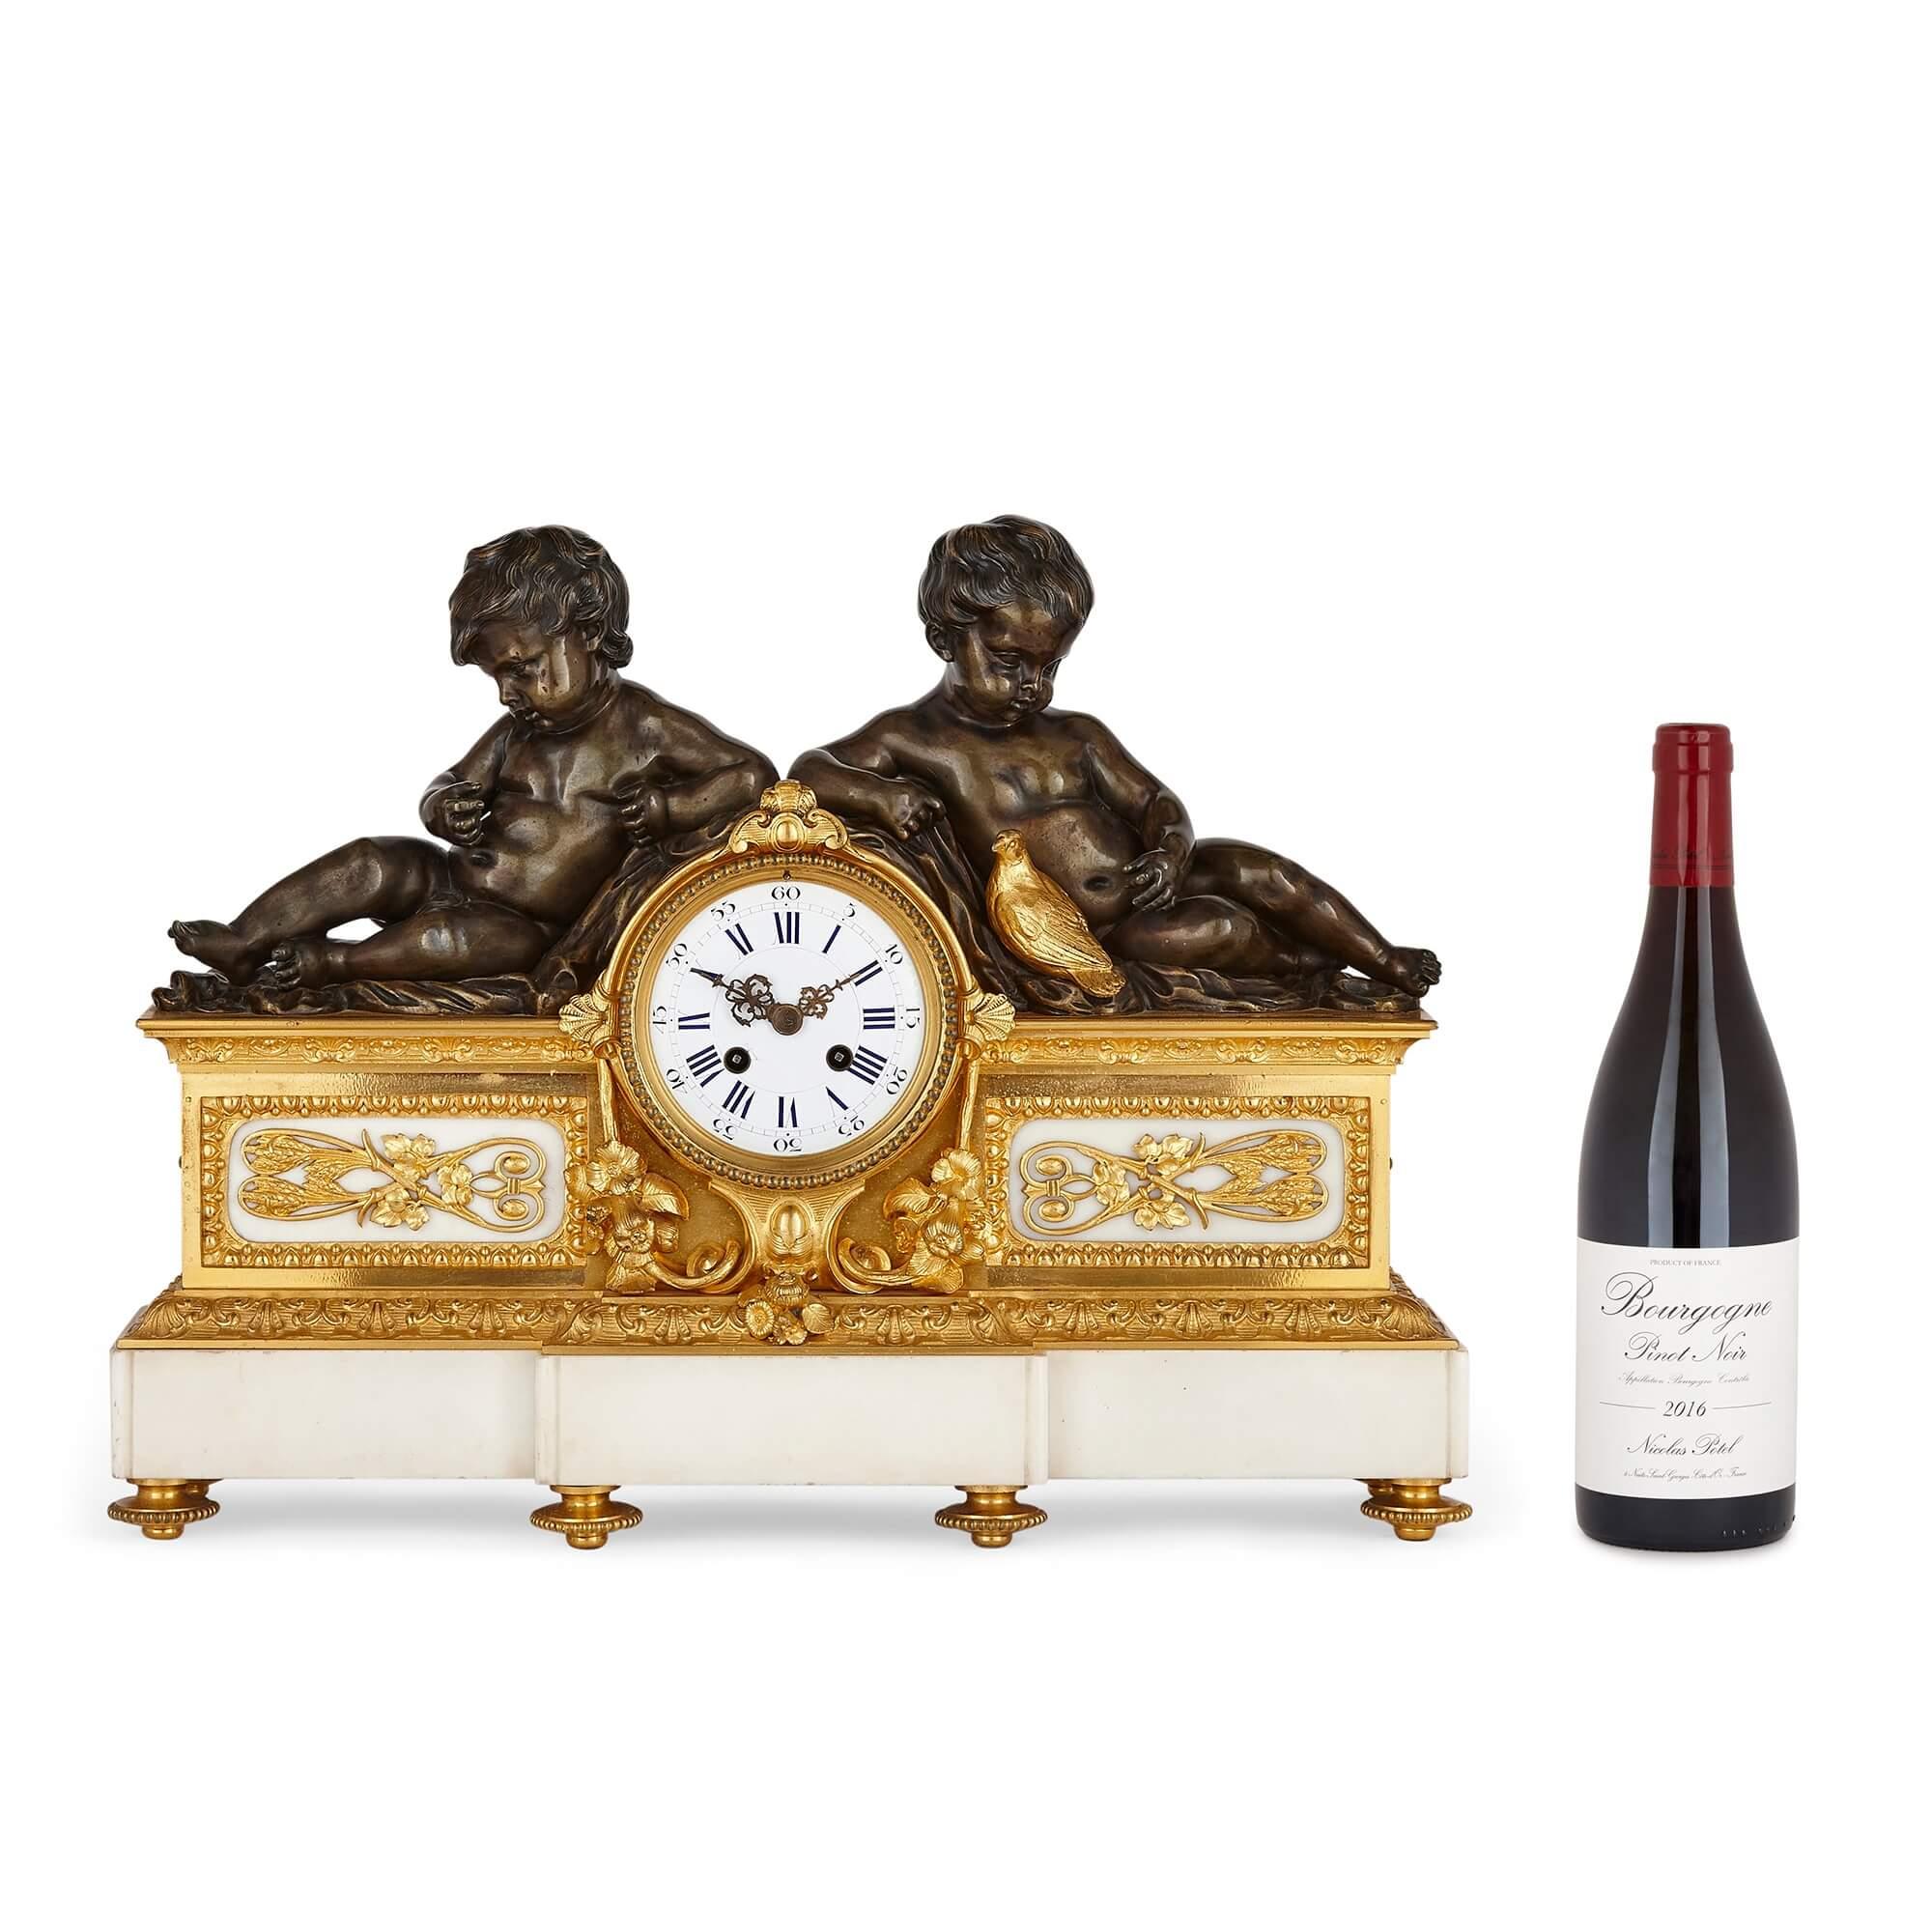 French neoclassical style bronze and marble three-piece clock set
French, 19th century
Clock: Height 38cm, width 50cm, depth 15cm
Candelabra: Height 62cm, width 27cm, depth 20cm

This beautiful three-piece clock set, featuring a mantel clock